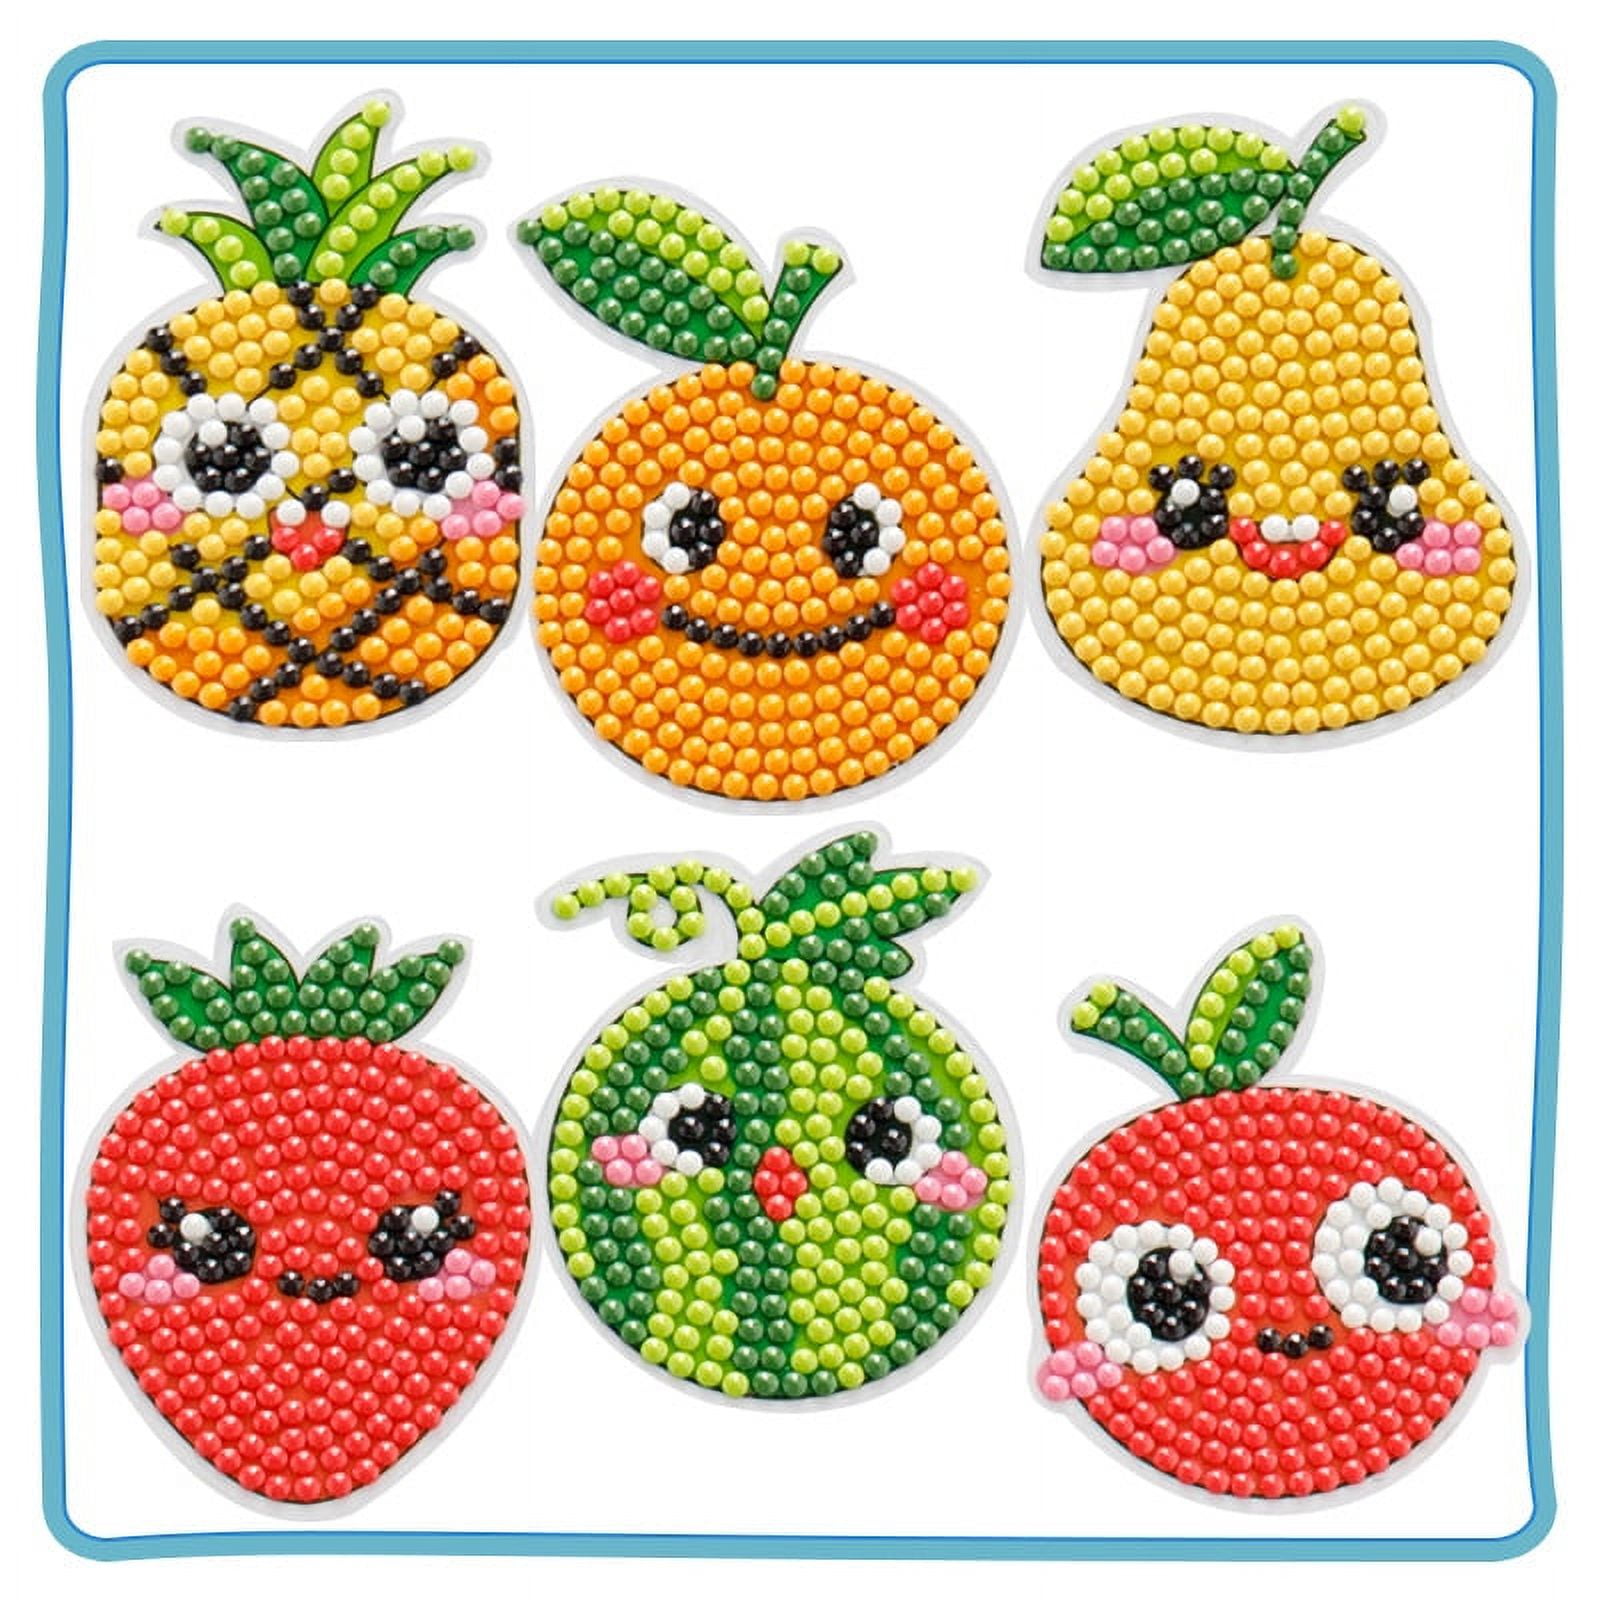 MEGZIHXN 5D DIY Diamond Painting Stickers Kits for Kids and Adult Beginners  - Cake Ice Cream Lollipop Candy Drink Watermelon Fruit Cup Pizza Craft  Marked with Diamonds by Numbers - Yahoo Shopping